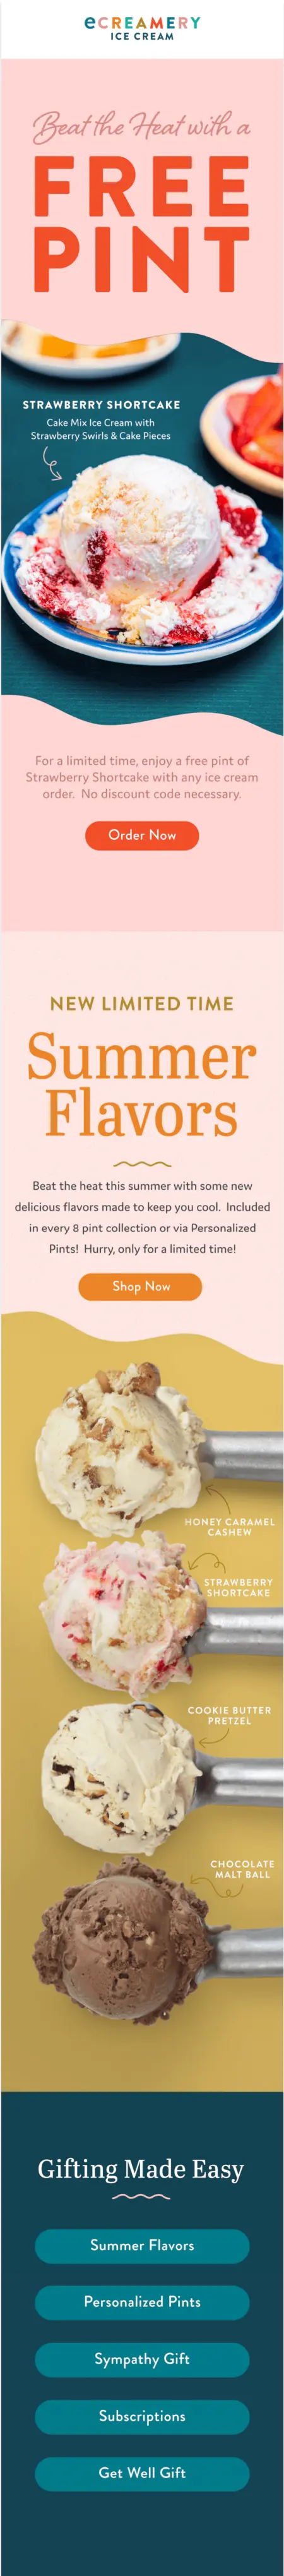 Image shows a marketing email, potentially a first email, from ecreamery that features a special offer, shows seasonal products, and includes an easy-to-navigate menu.